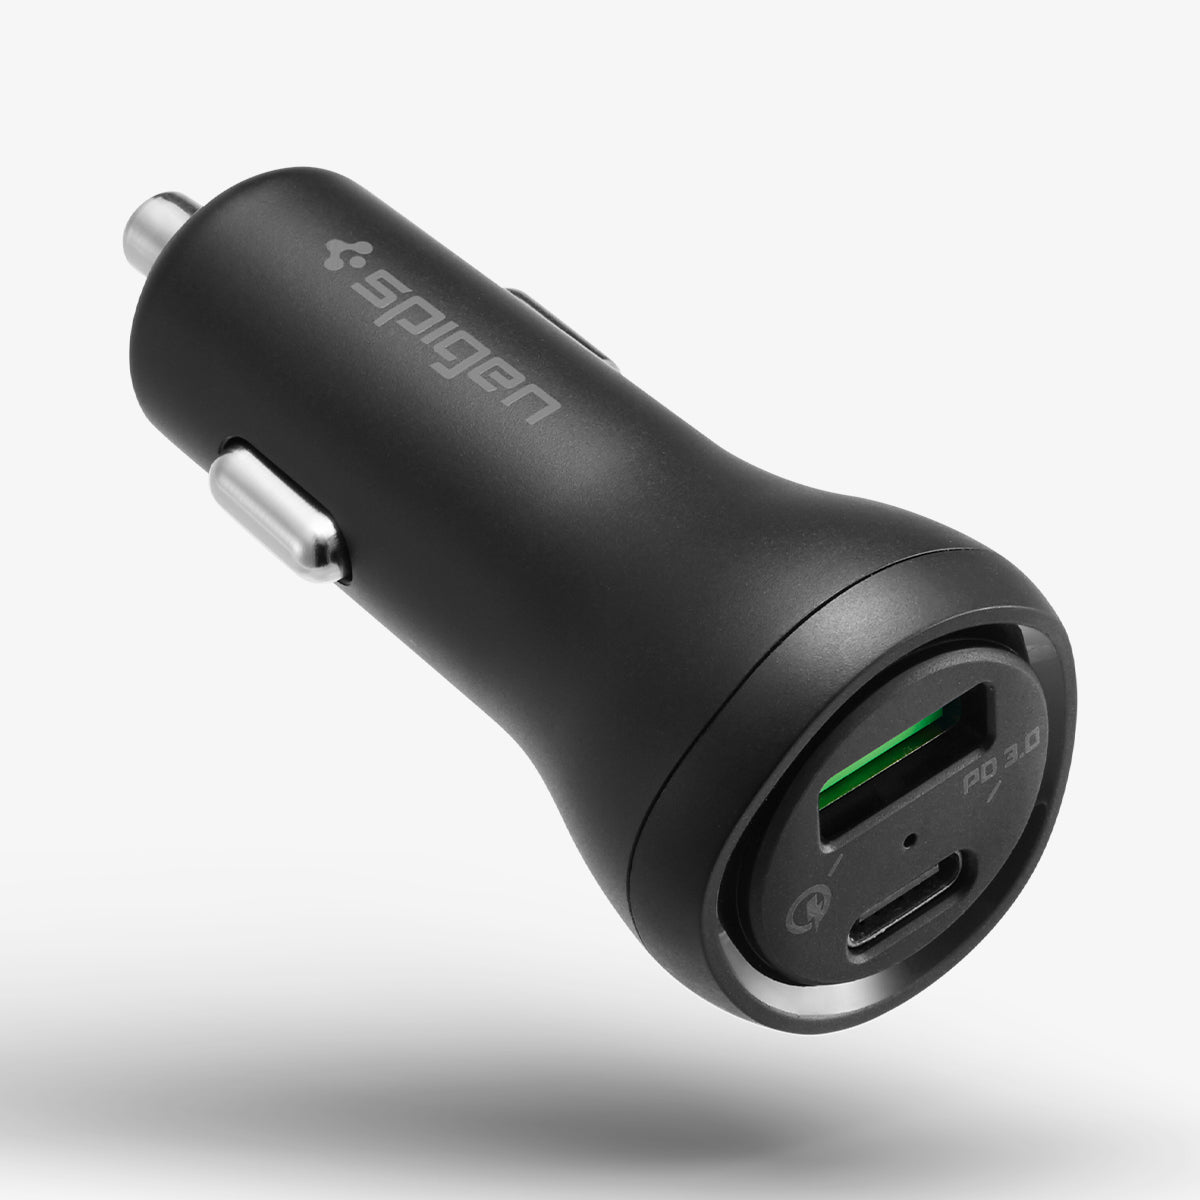 000CP25597 - SteadiBoost™ USB-C PD3.0 Car Charger showing the front and side